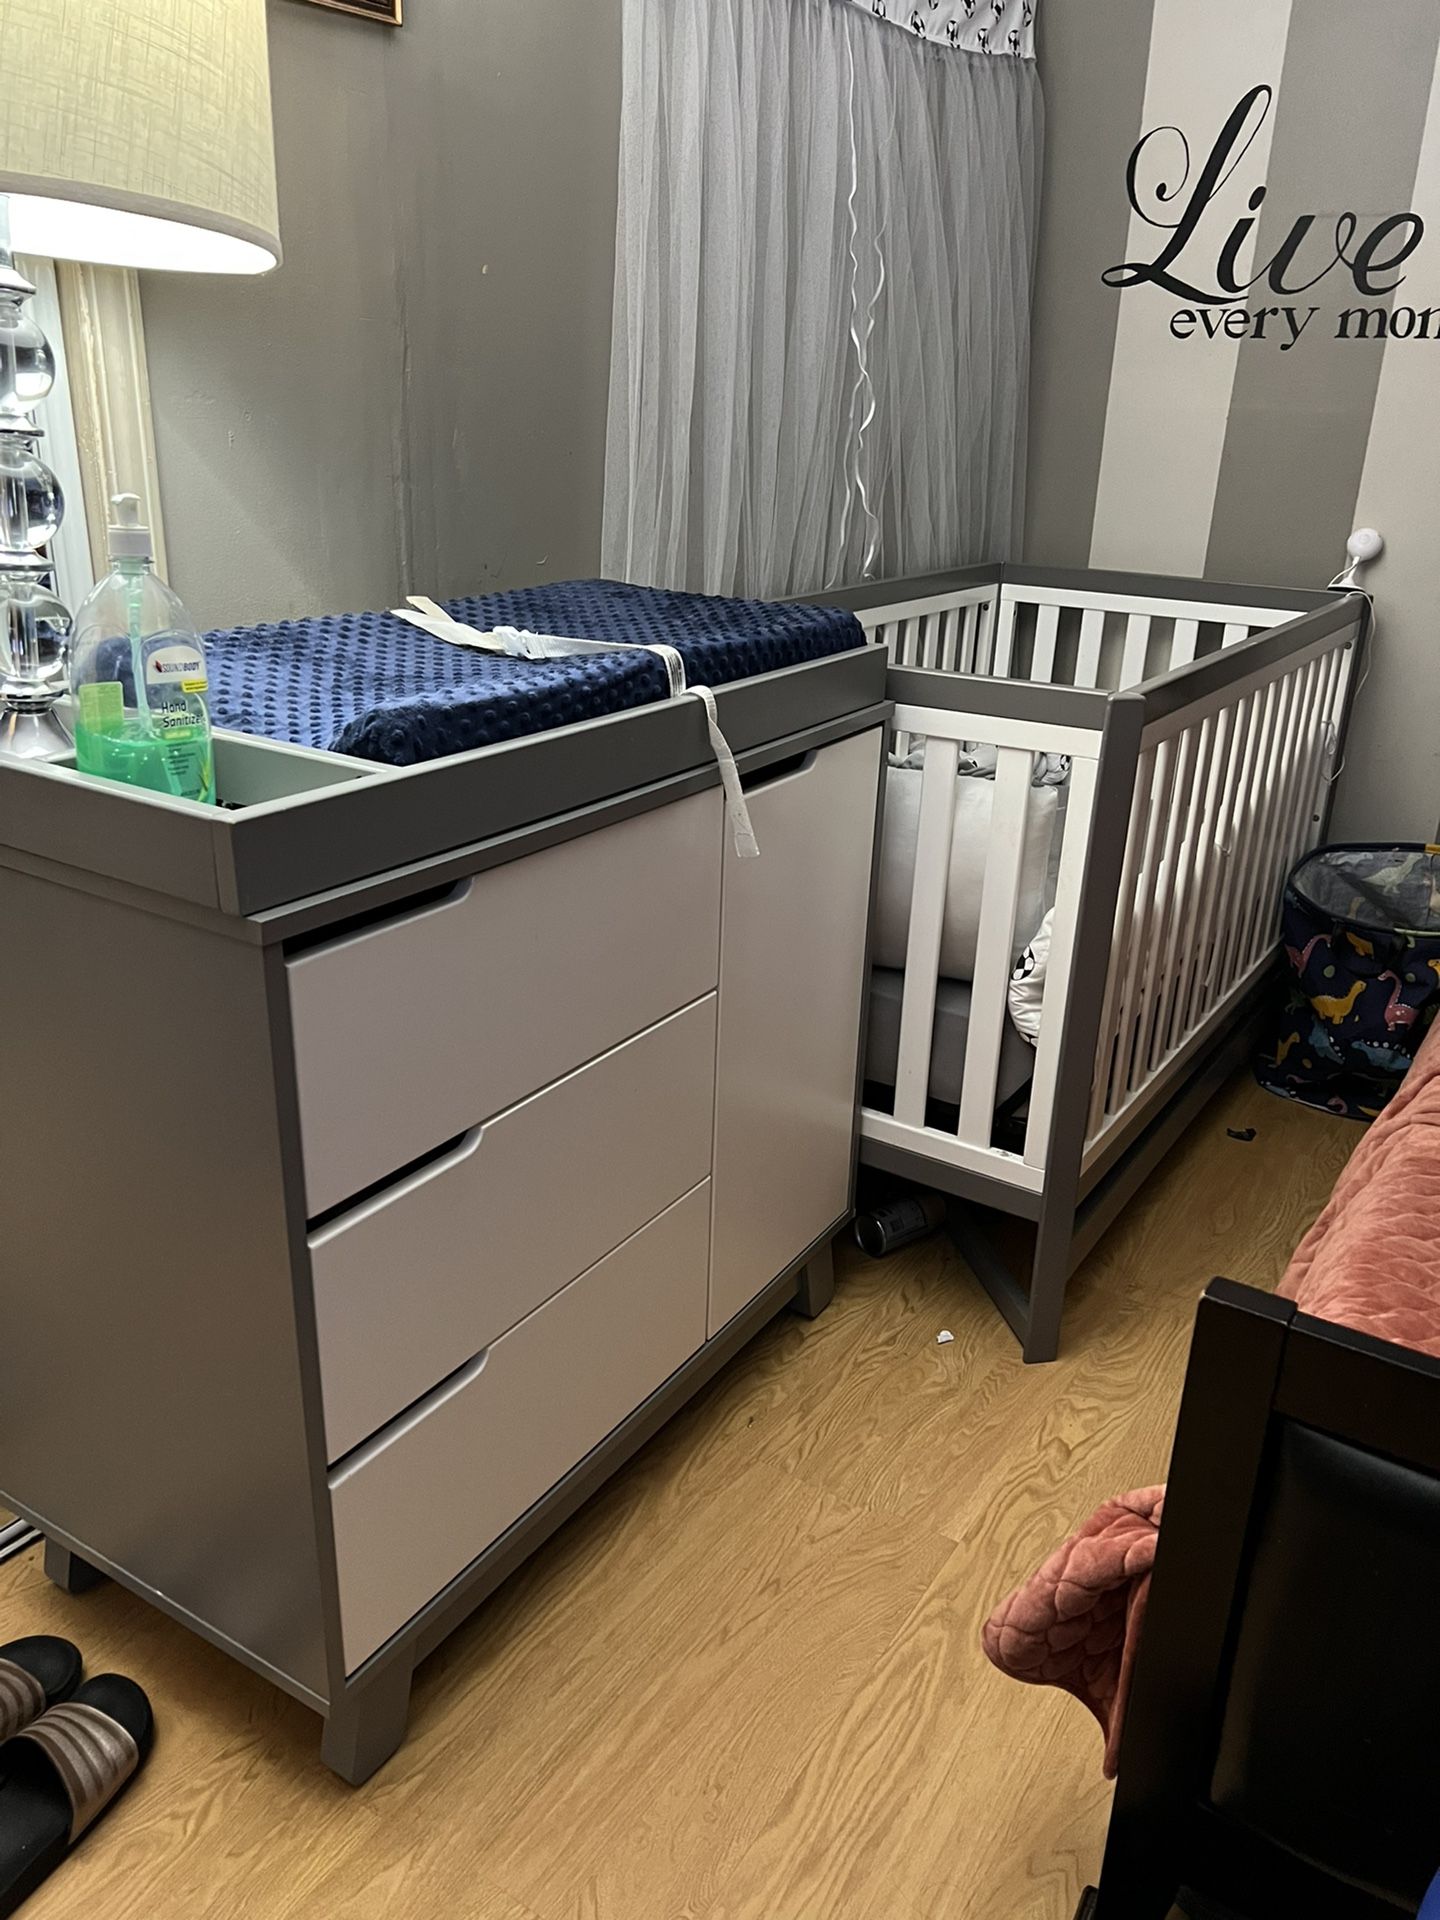 Baby Crib And Changing Station- Need Gone ASAP